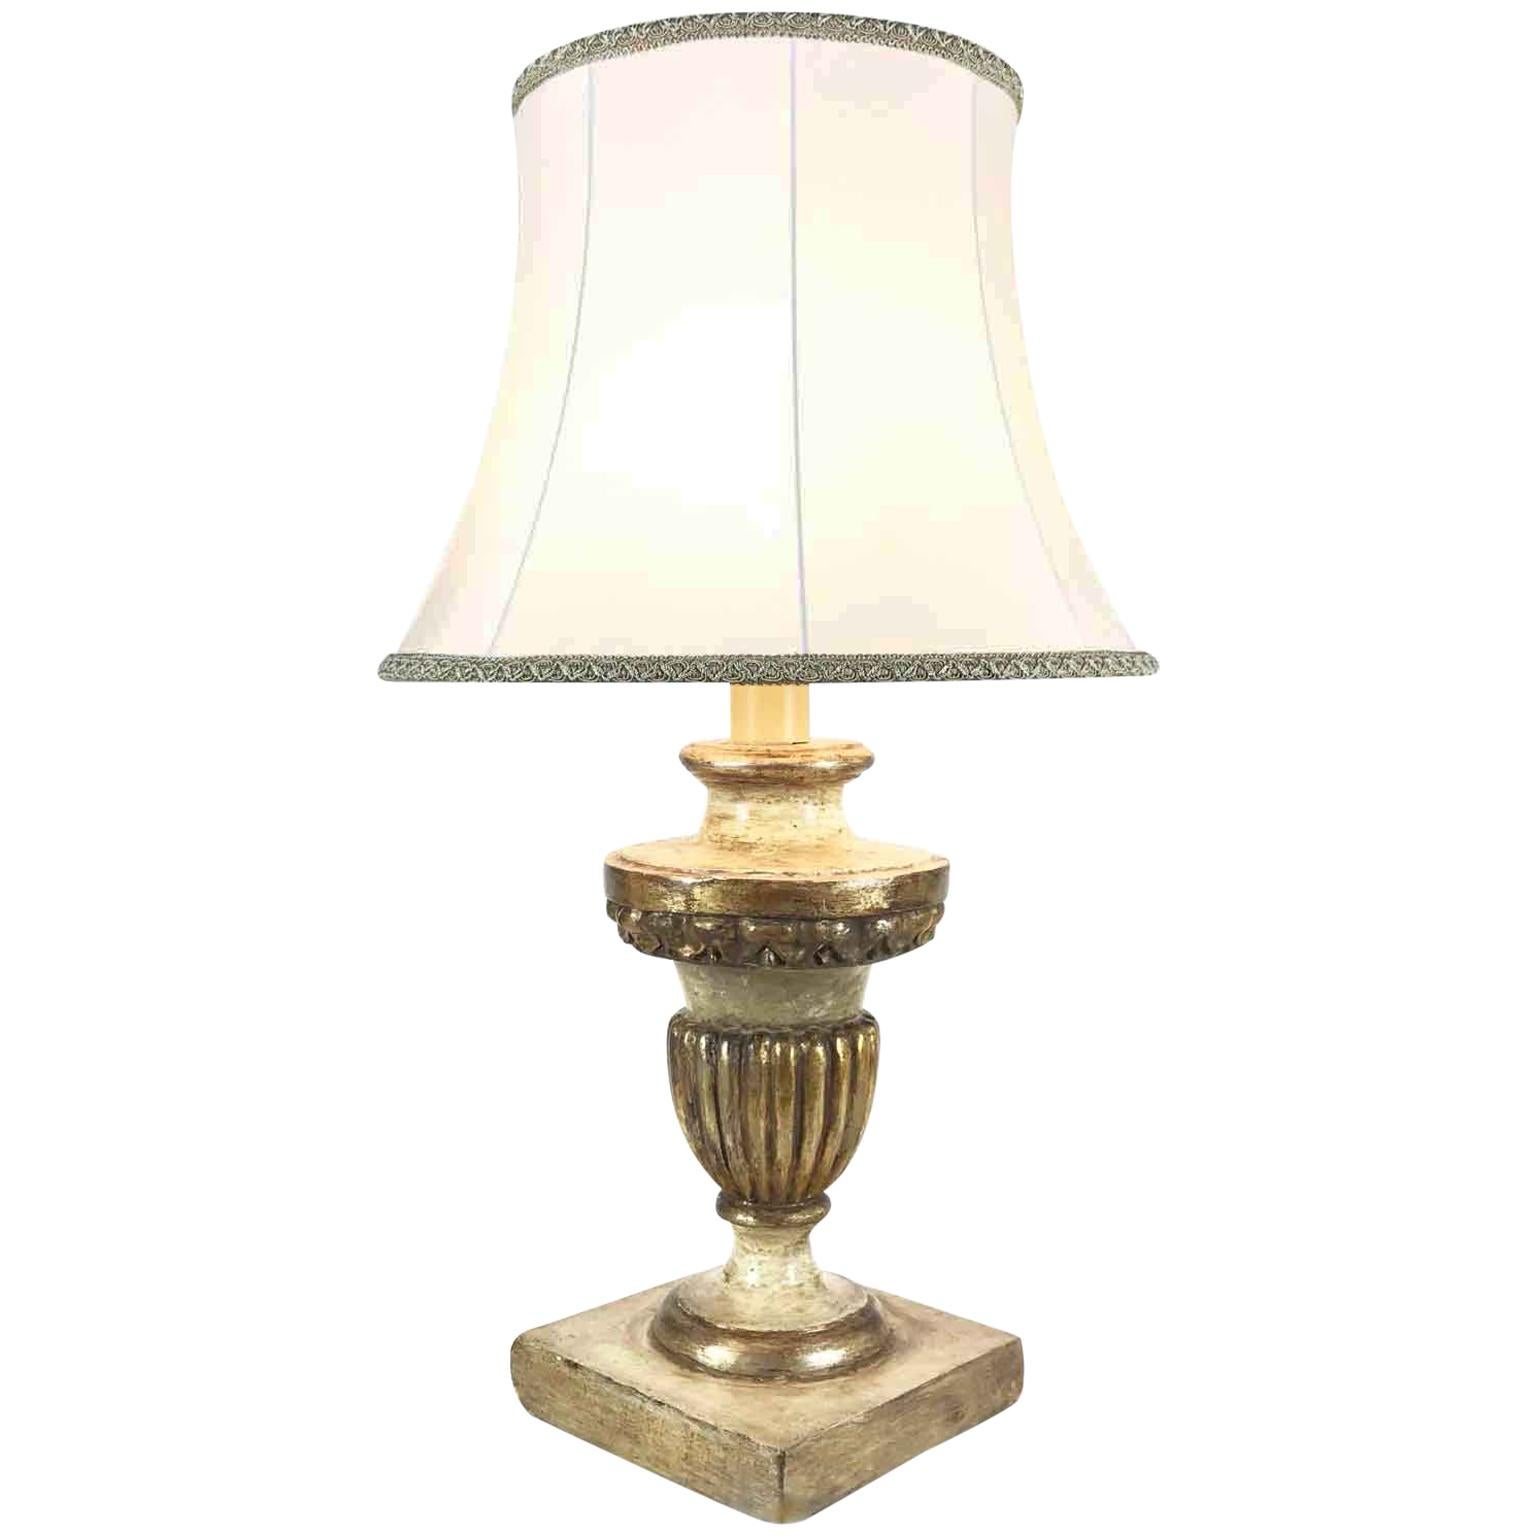 19th Century Neoclassical Italian Carved White and Giltwood Table Lamp